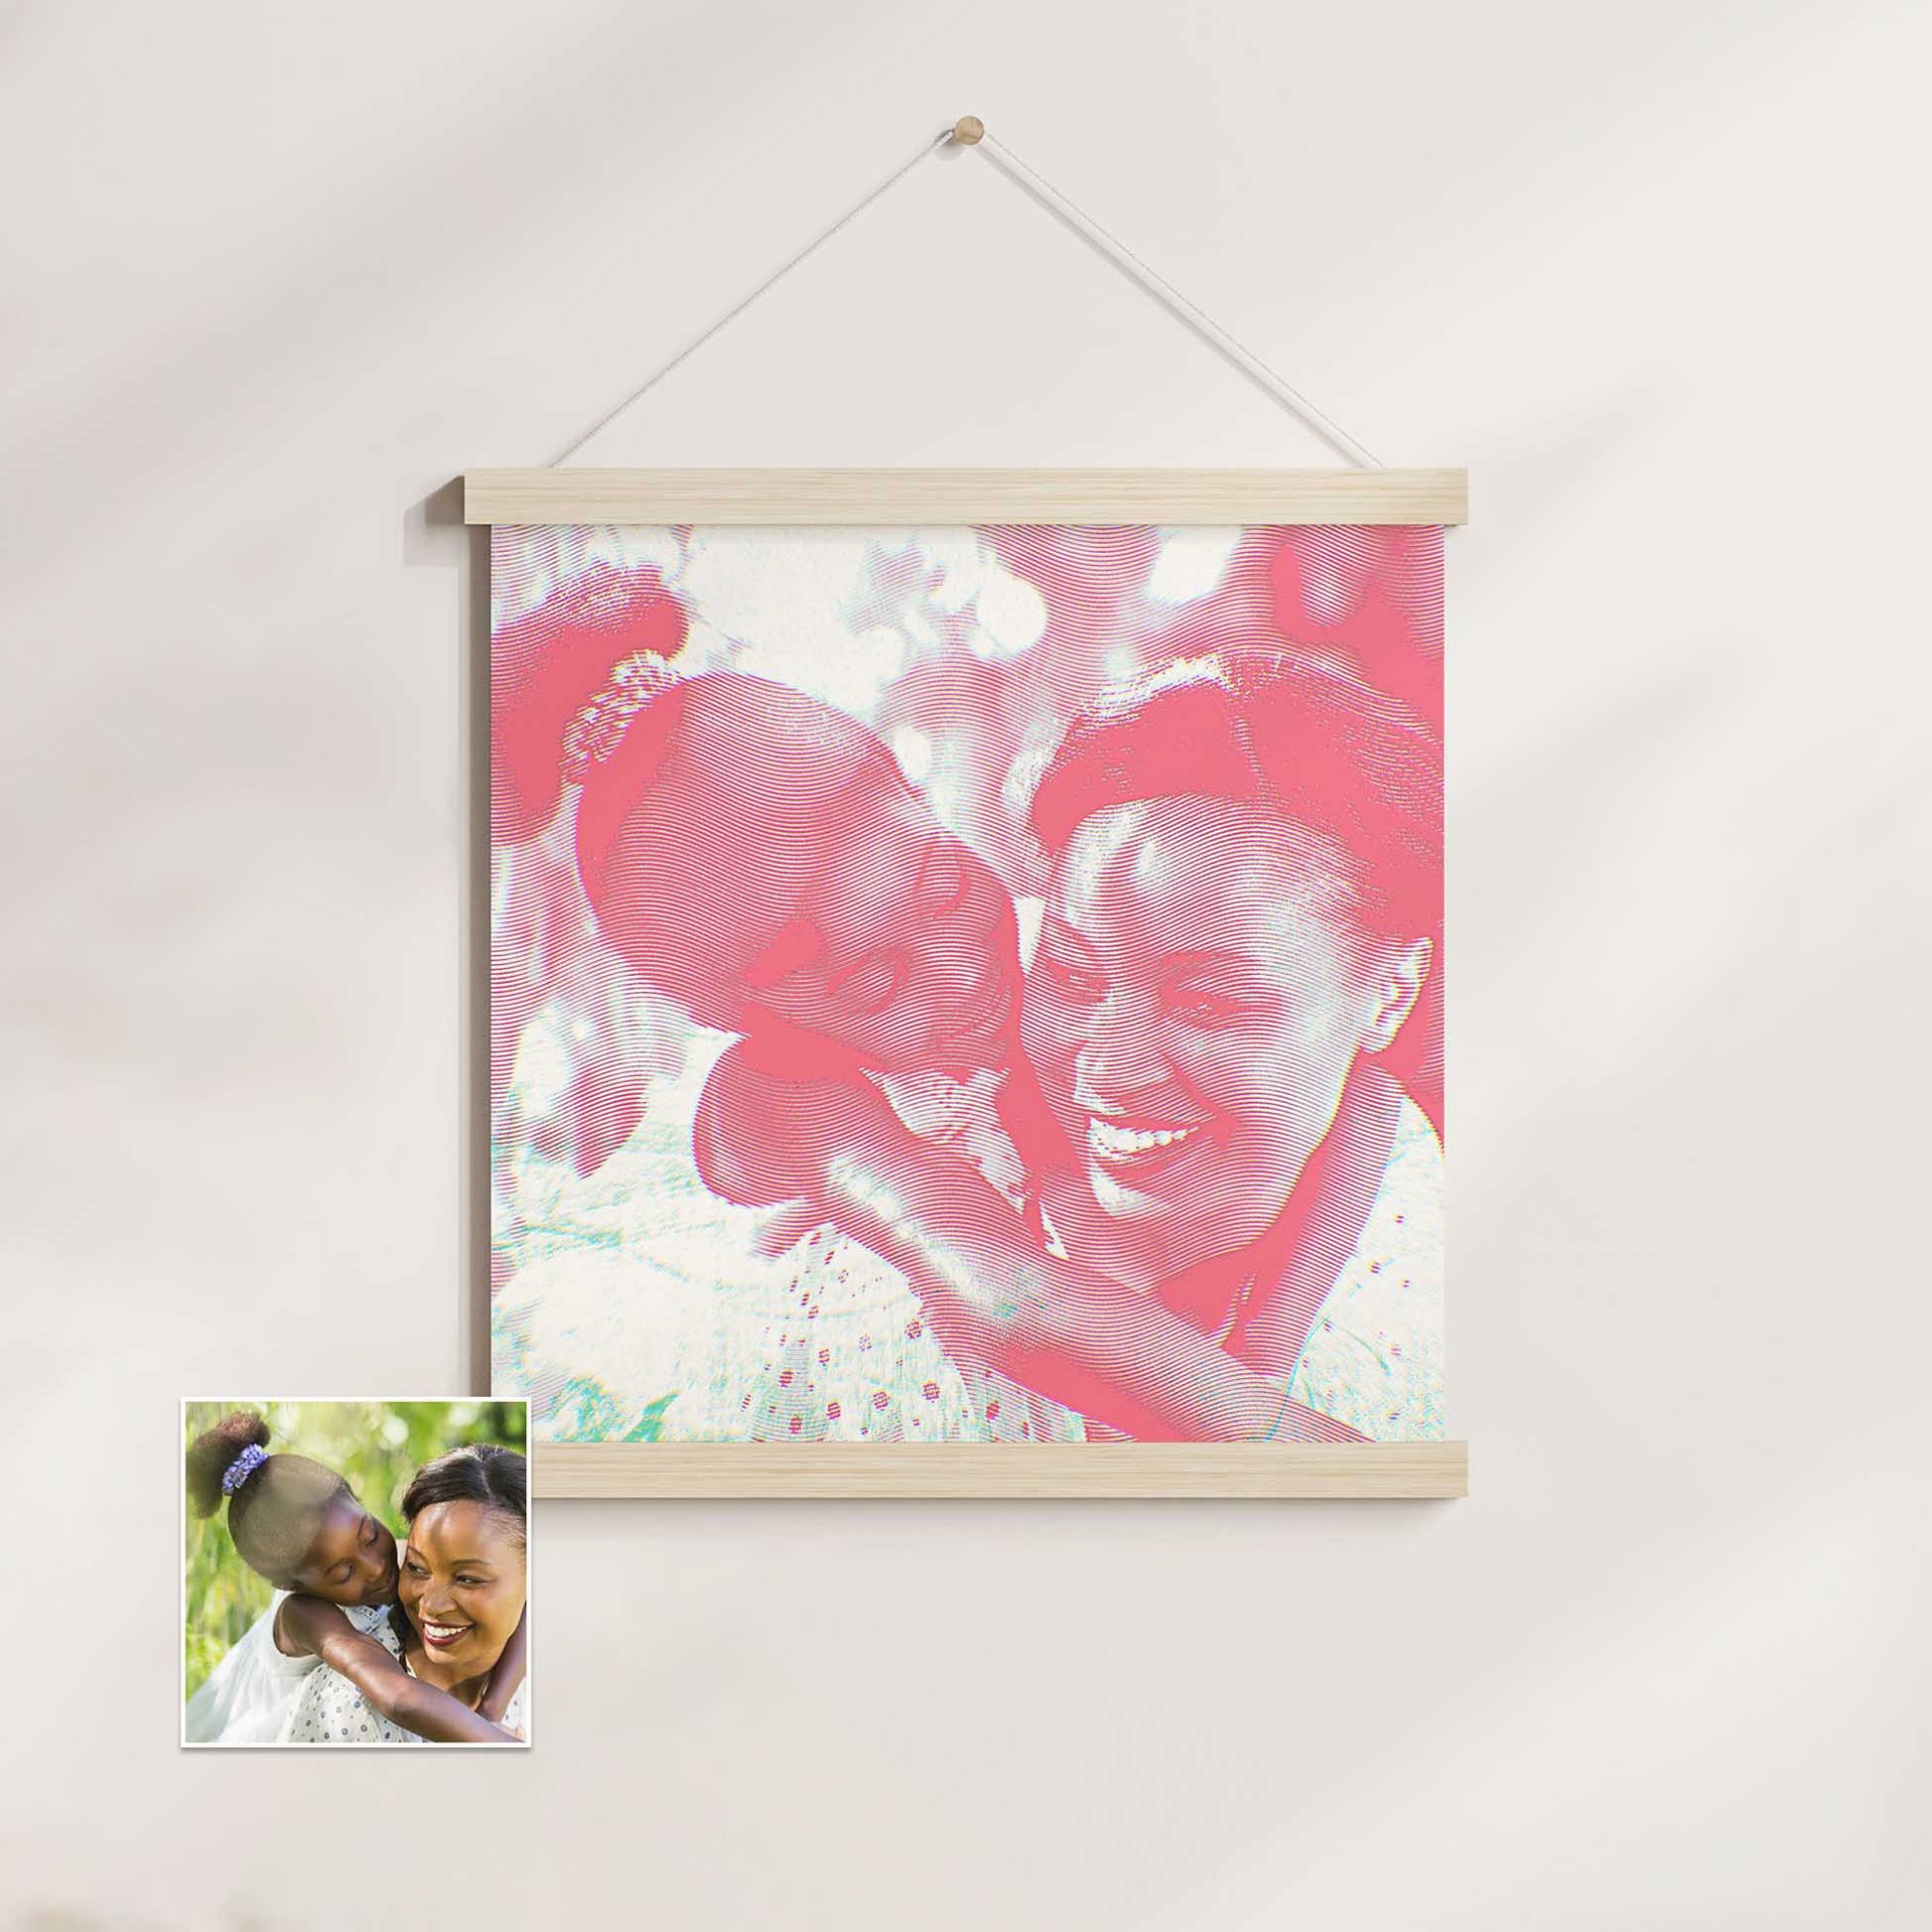 Engraving Texture and Vibrant Colors: Our Personalised Pink Engraving Poster Hanger features a unique engraving texture that adds depth and character to your chosen image. The vibrant and vivid colors create a cool and chic home decor